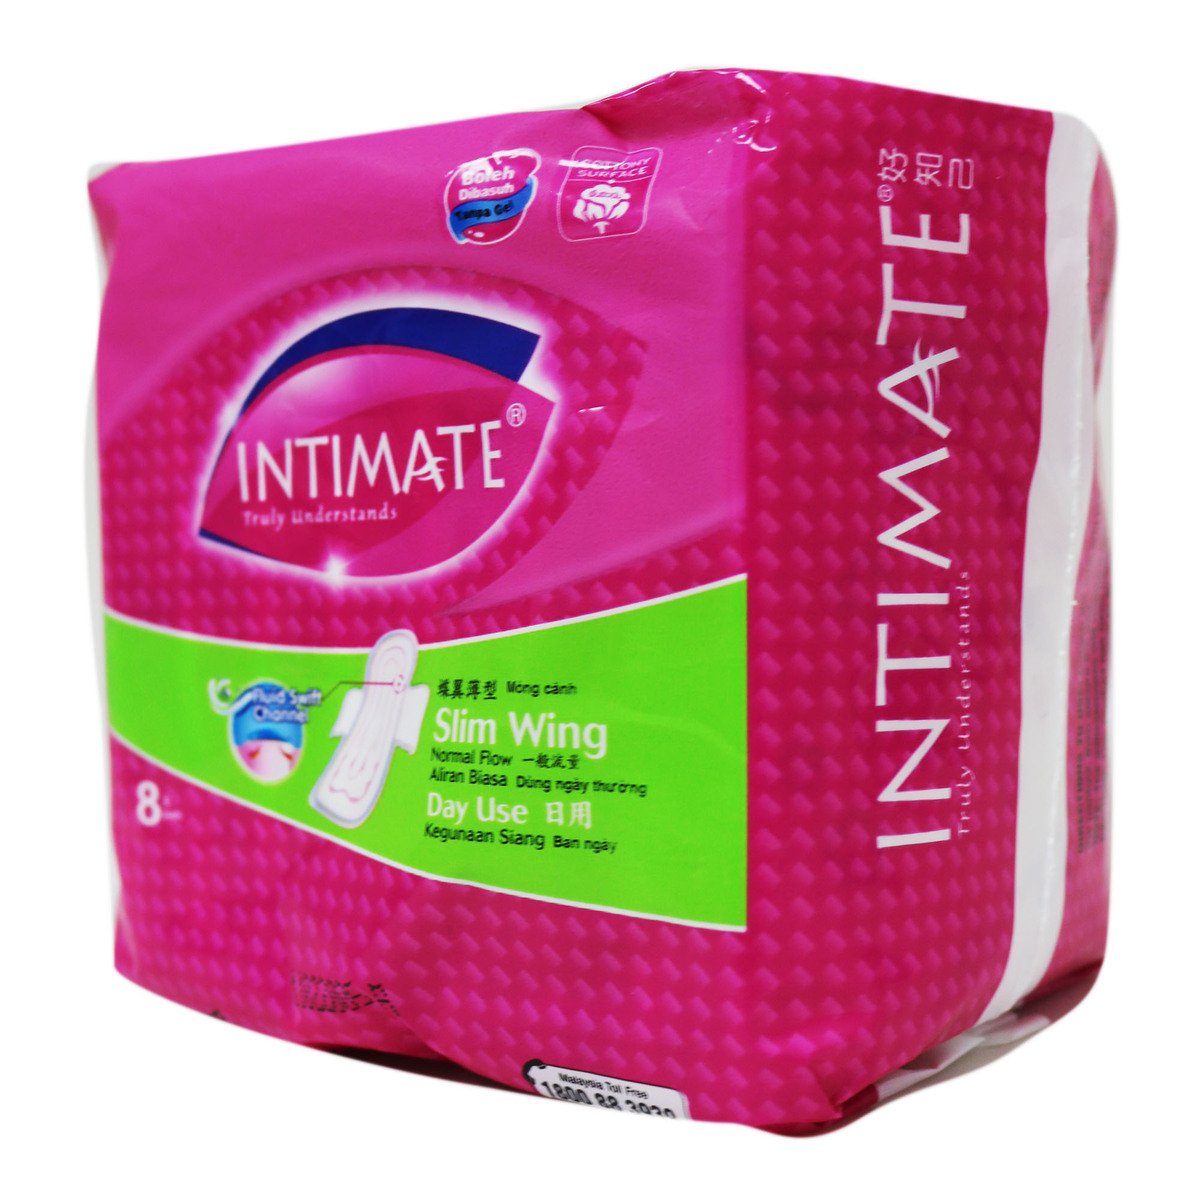 Intimate Daylite Slim Wing 8 Counts